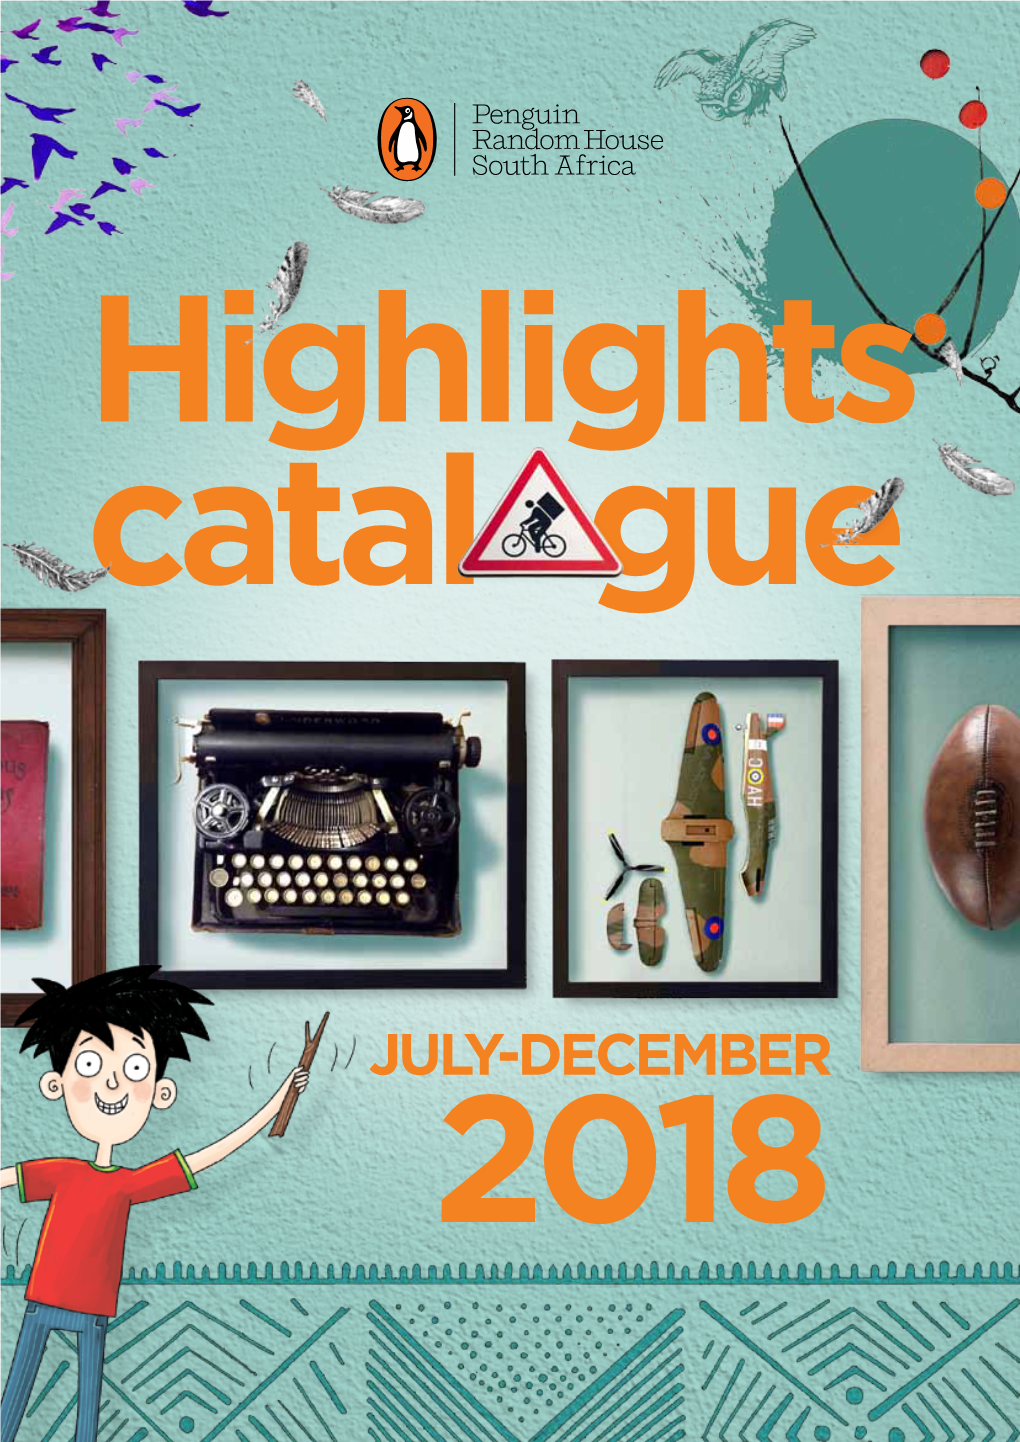 JULY-DECEMBER 2018 Fiction and Non- Fiction July | Highlights Catalogue | July – December 2018 July – December 2018 | Penguin Random House South Africa | July